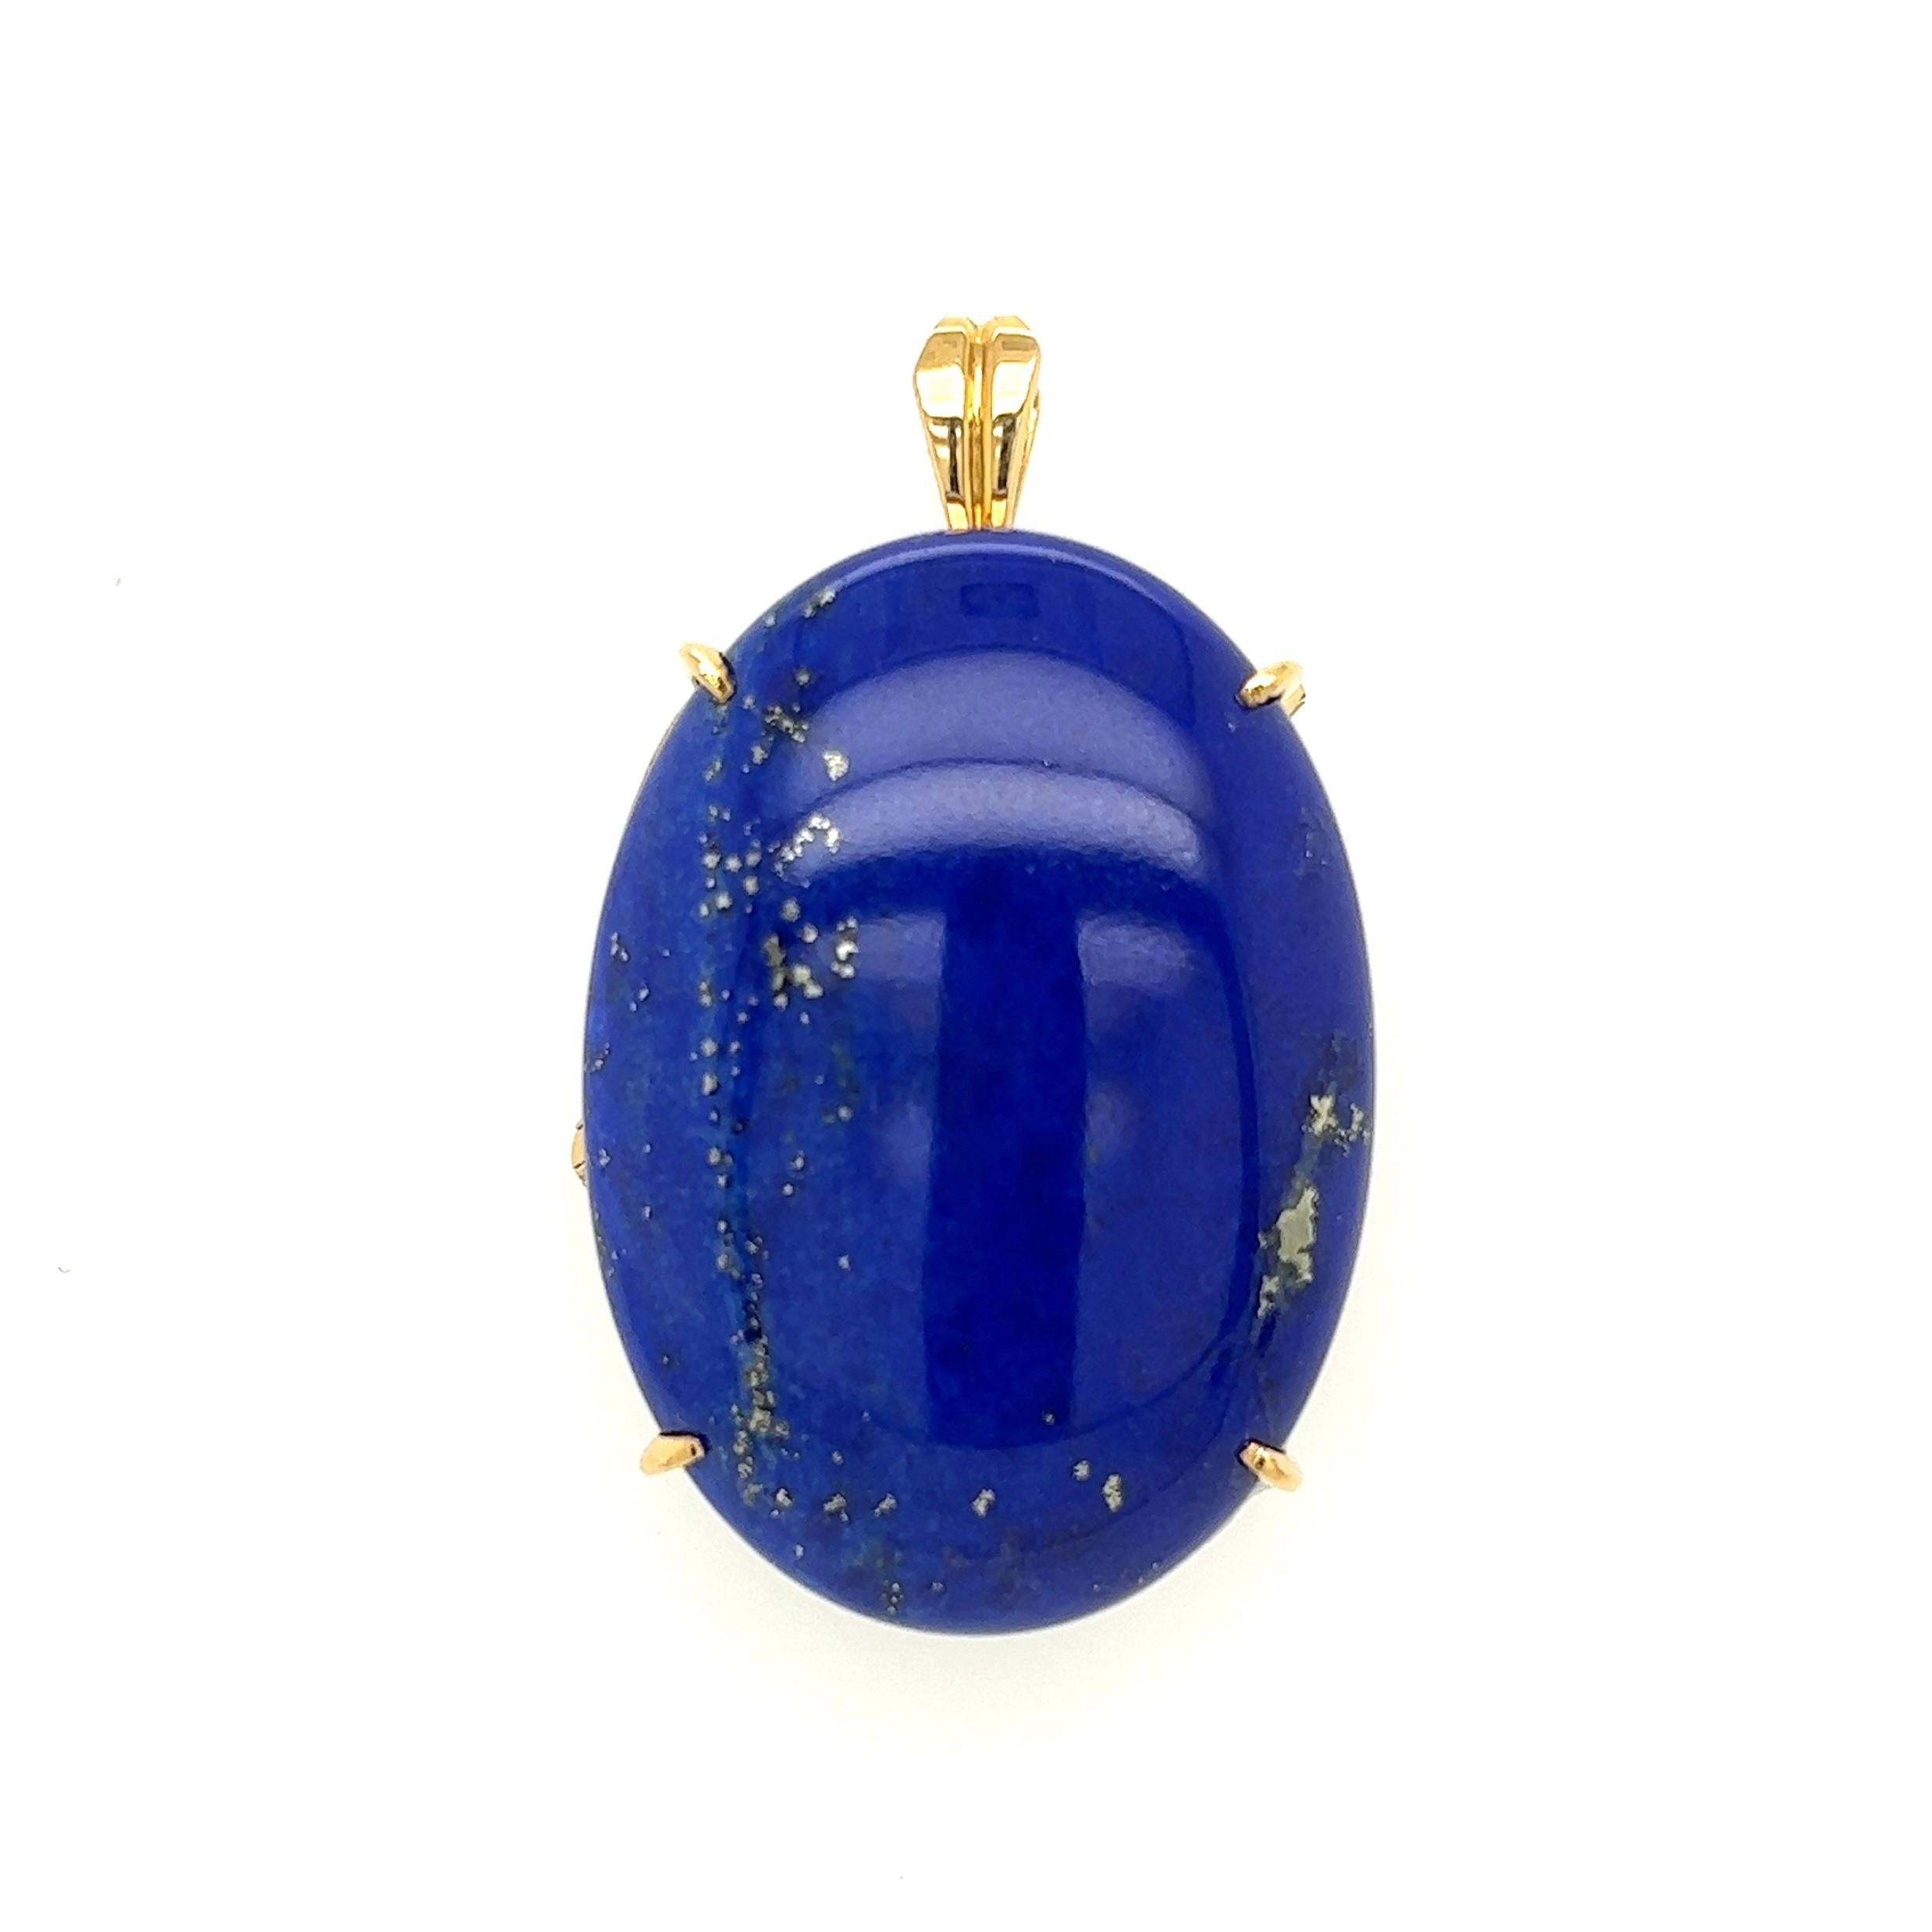 Simply Beautiful! Large Oval Lapis Lazuli Gold Pendant Brooch. Securely centered by a Large Oval Cabochon Laps w/Pyrite. Hand-crafted 18K Yellow Gold mounting. Approx. Dimensions: 1.7” l x 1” w x 0.6” h. More Beautiful in real time...Sure to be